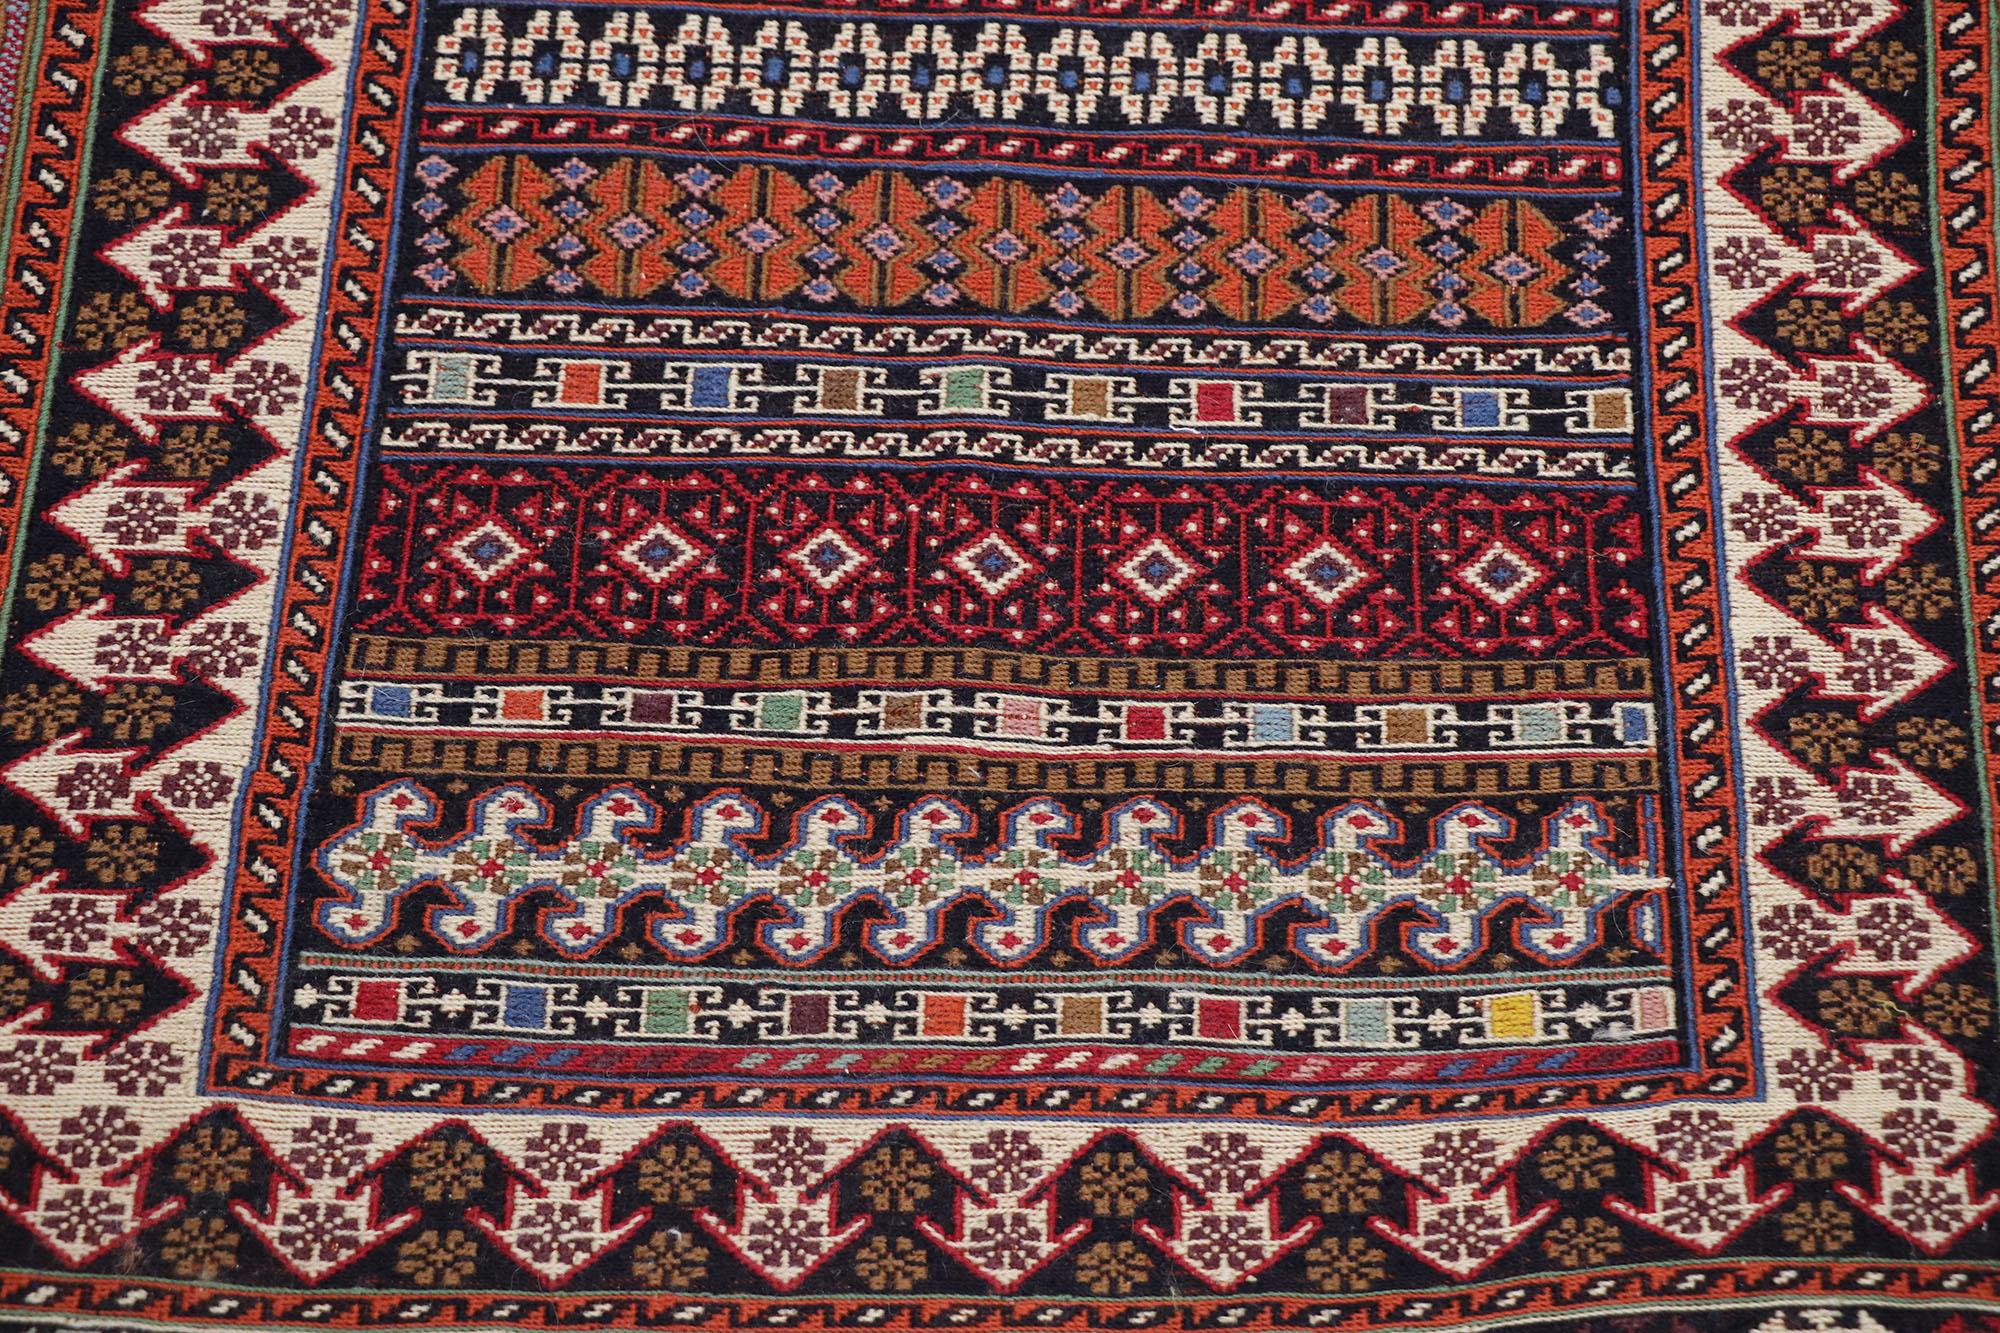 Hand-Woven Vintage Turkish Kilim Rug, Small Flat-Weave Rug with Boho Chic Tribal Style